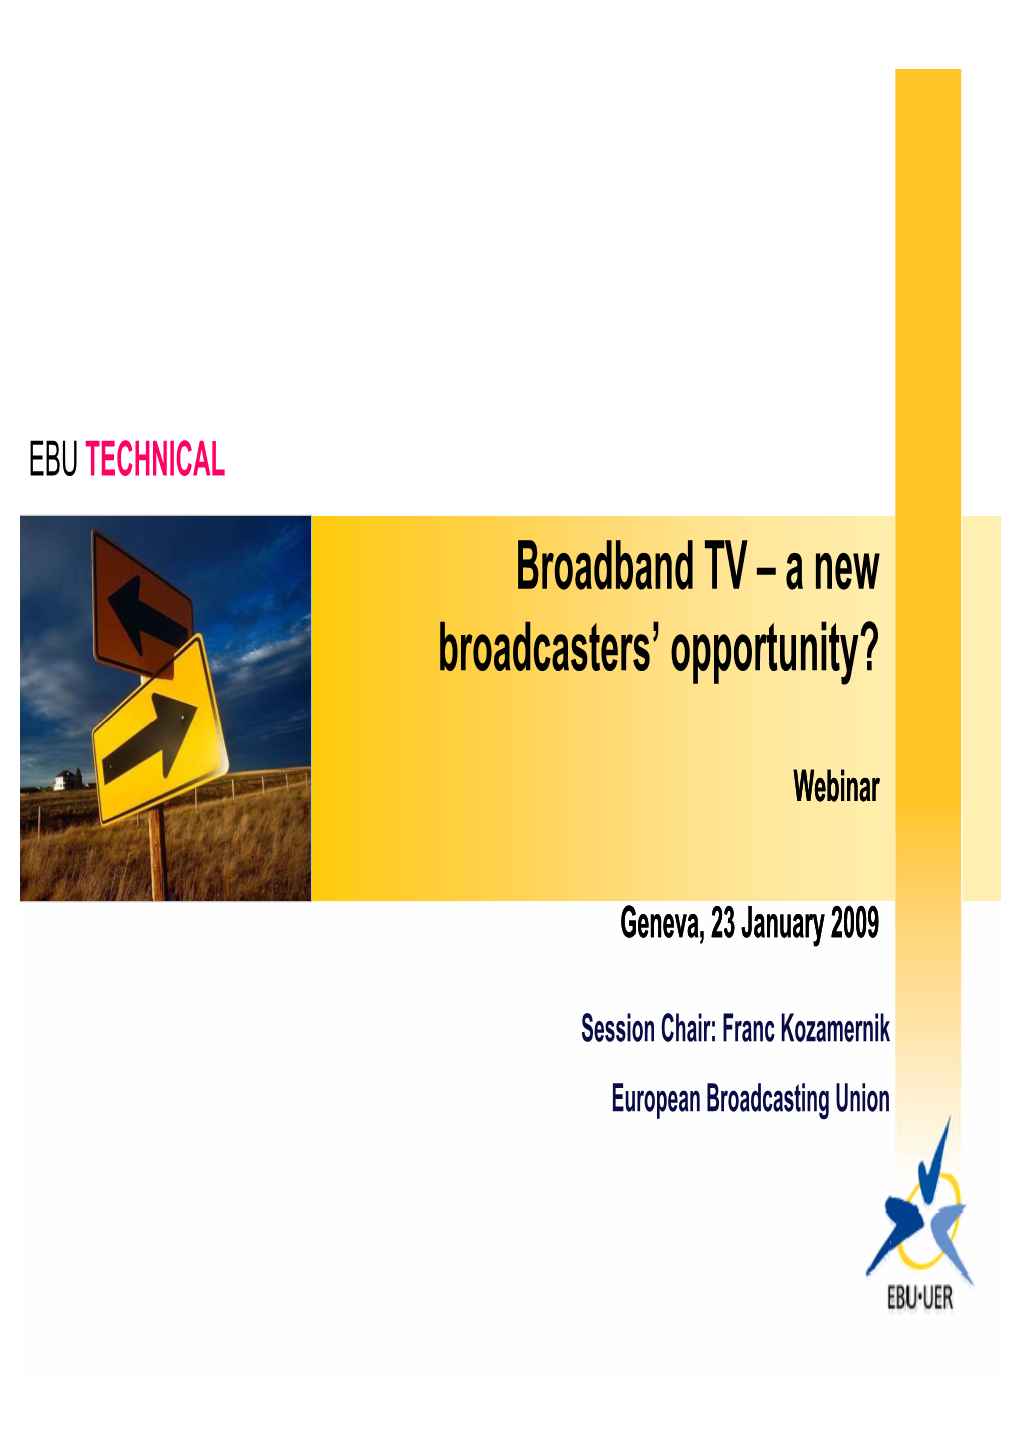 Broadband TV a New Broadband TV – a New Broadcasters' Opportunity?